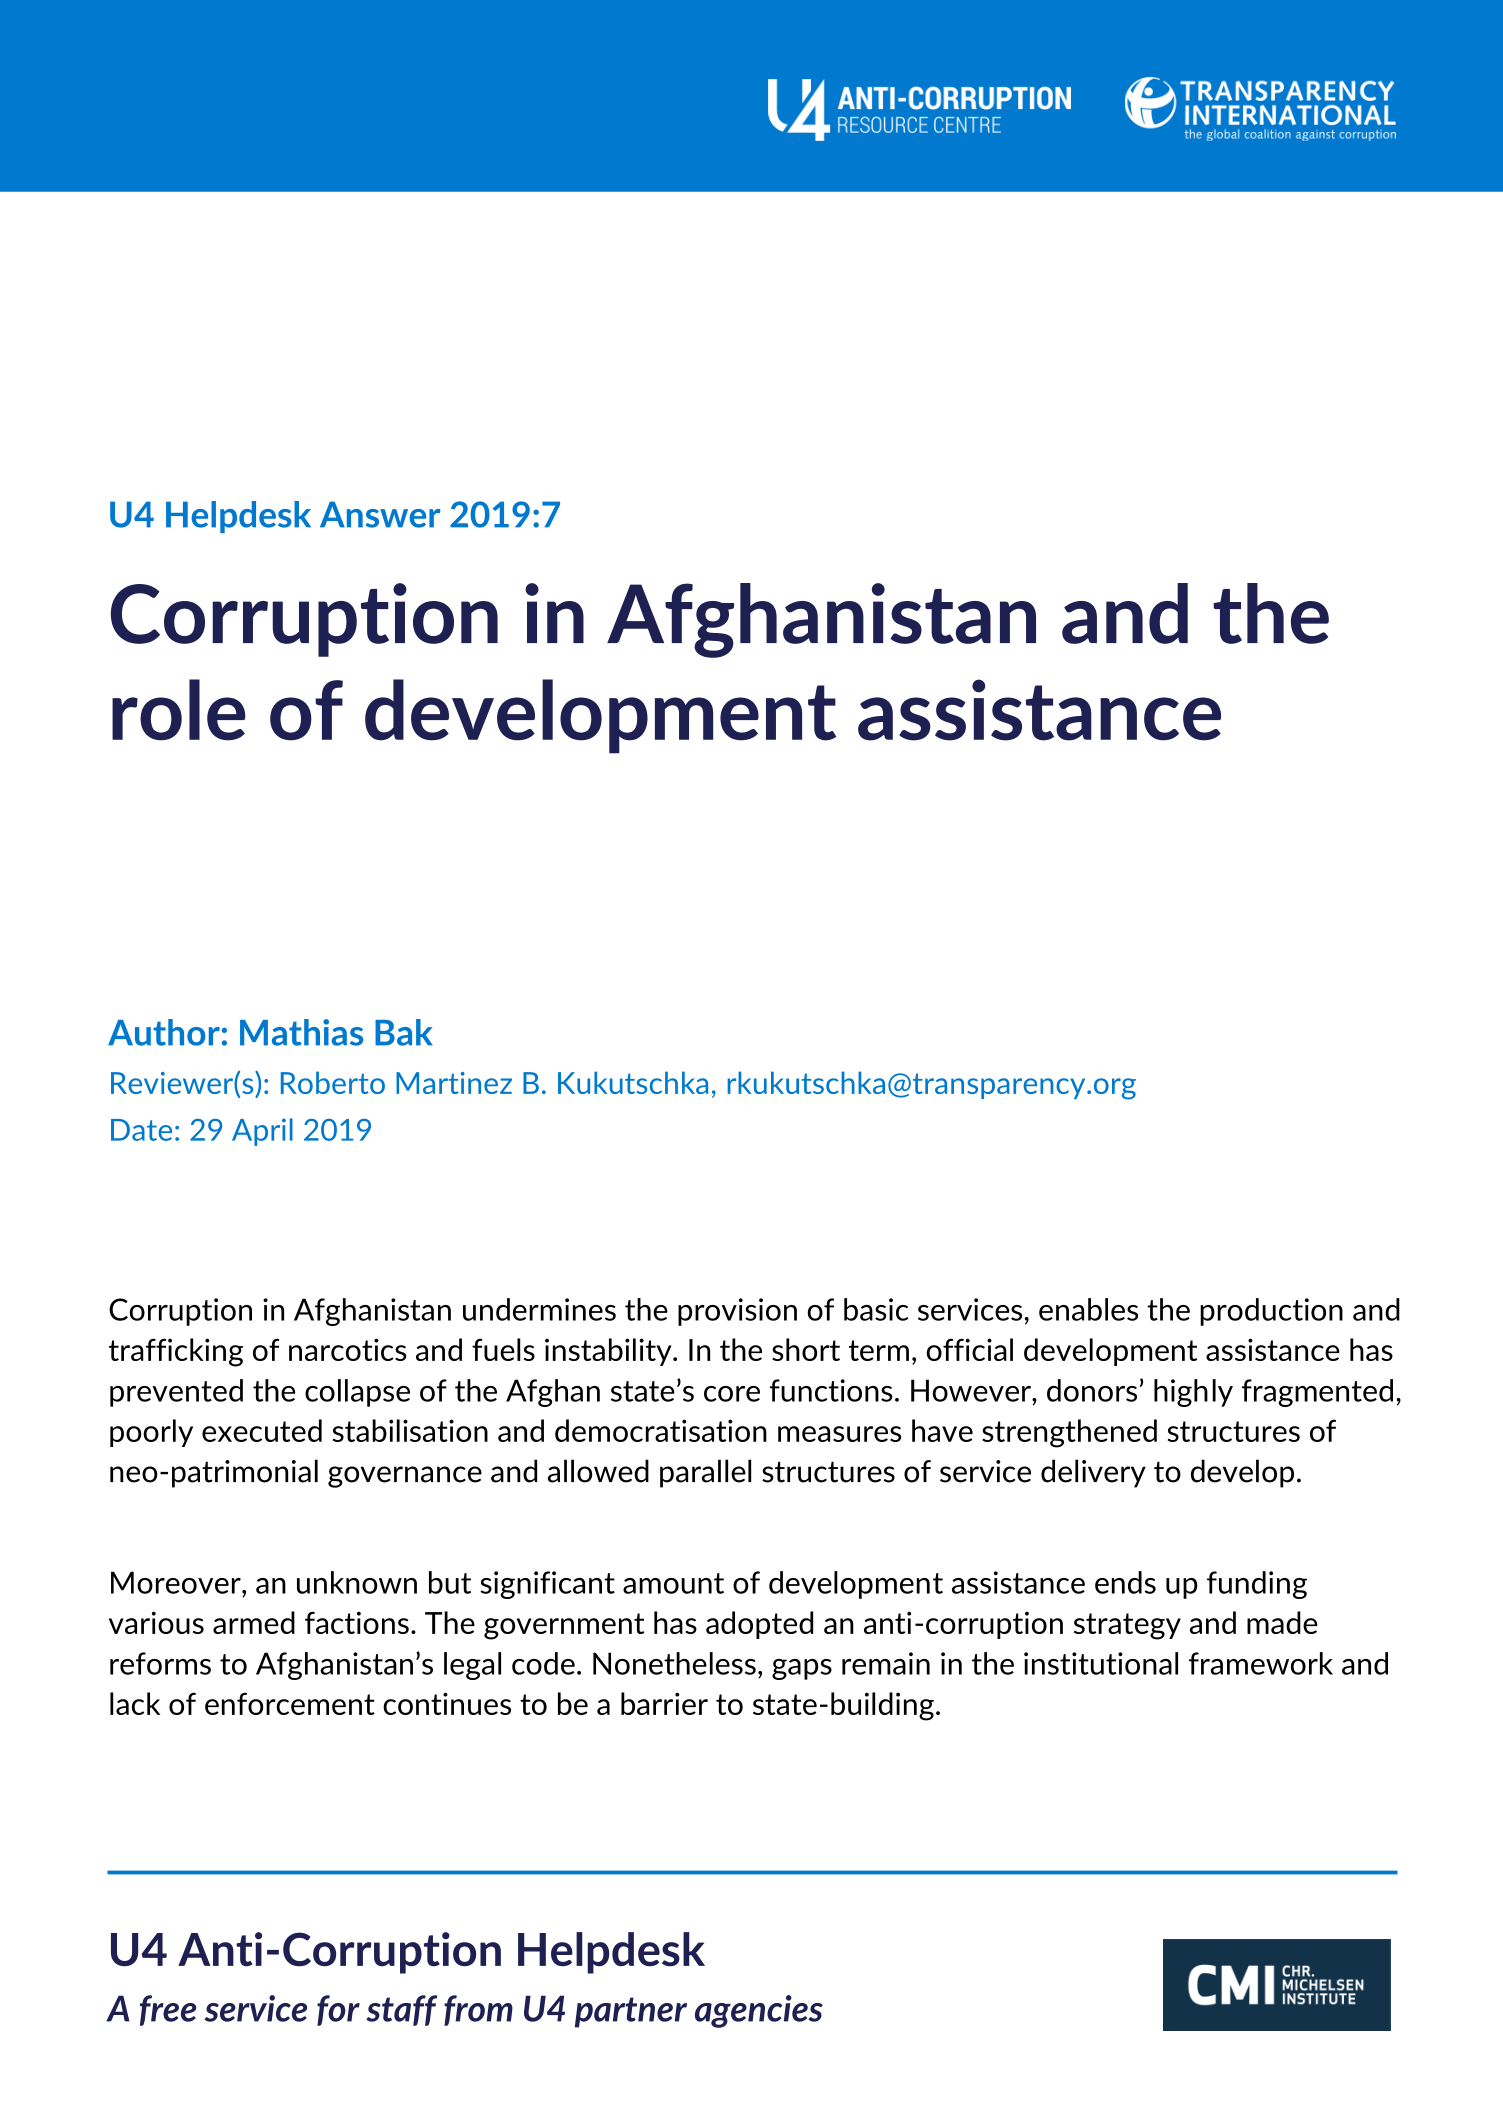 Corruption in Afghanistan and the role of development assistance